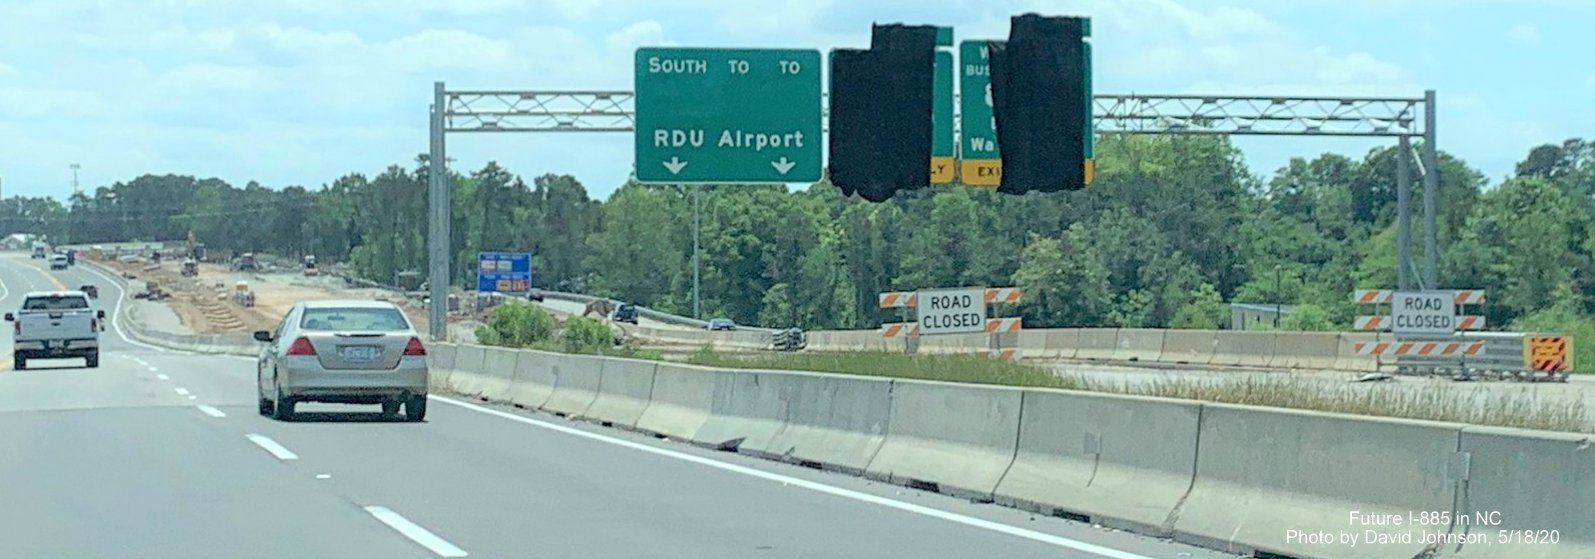 Image of uncovered pull through sign still without shields on future I-885 South lanes as seen from current US 70 East lanes in Durham, by David Johnson in May 2020